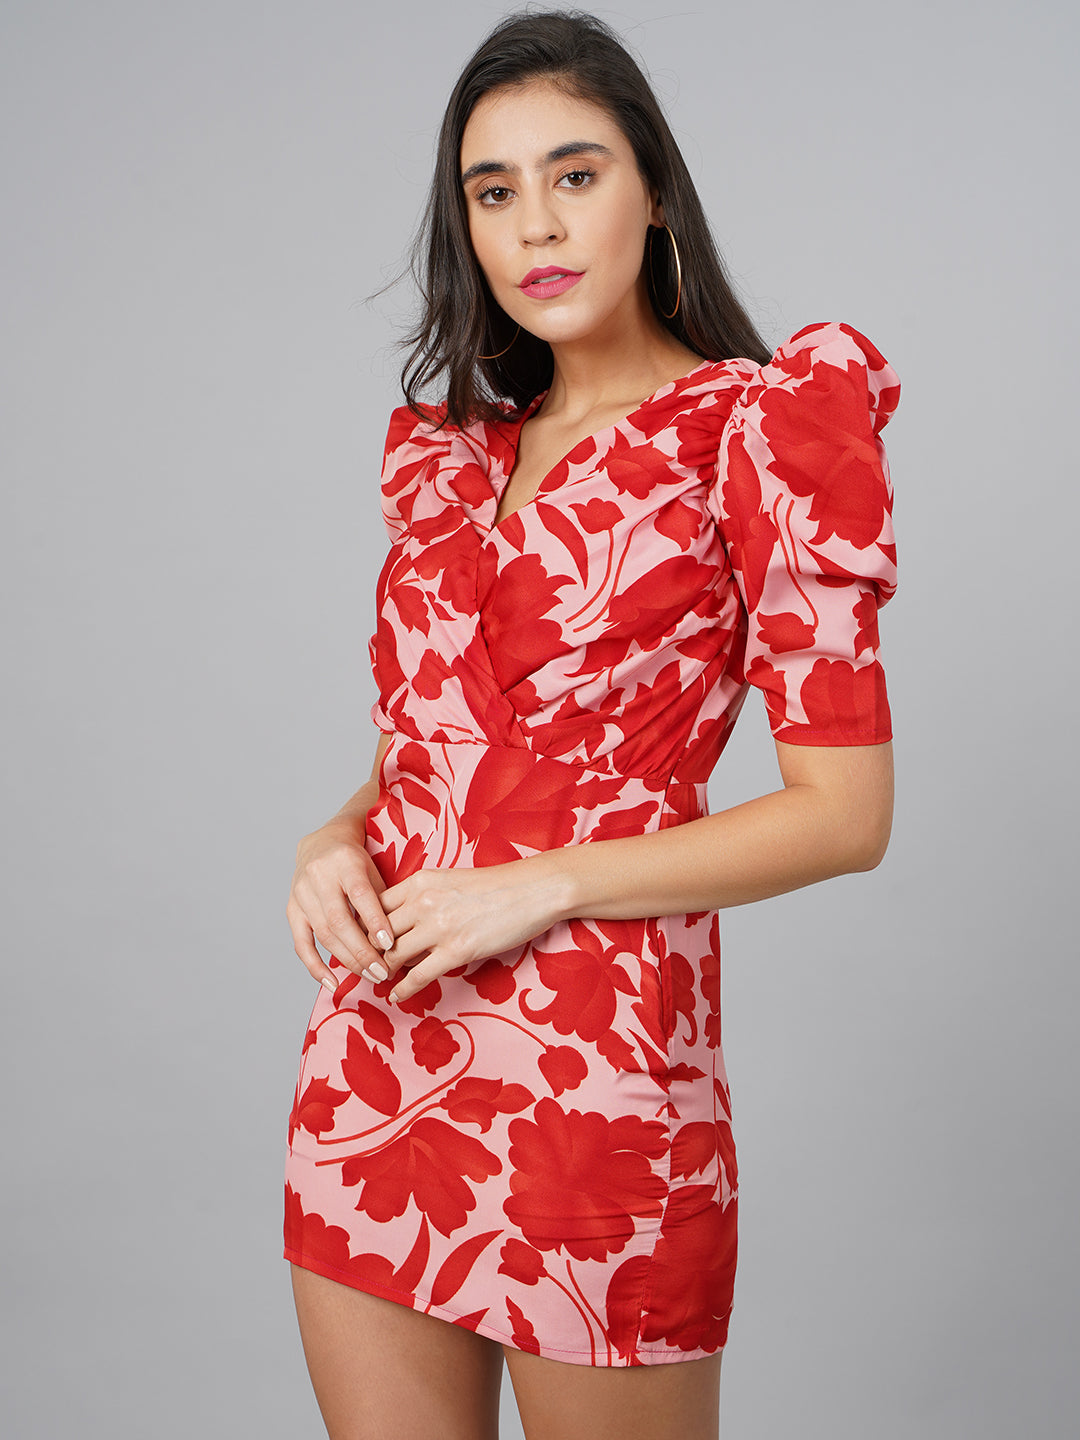 SCORPIUS Red Floral Dress